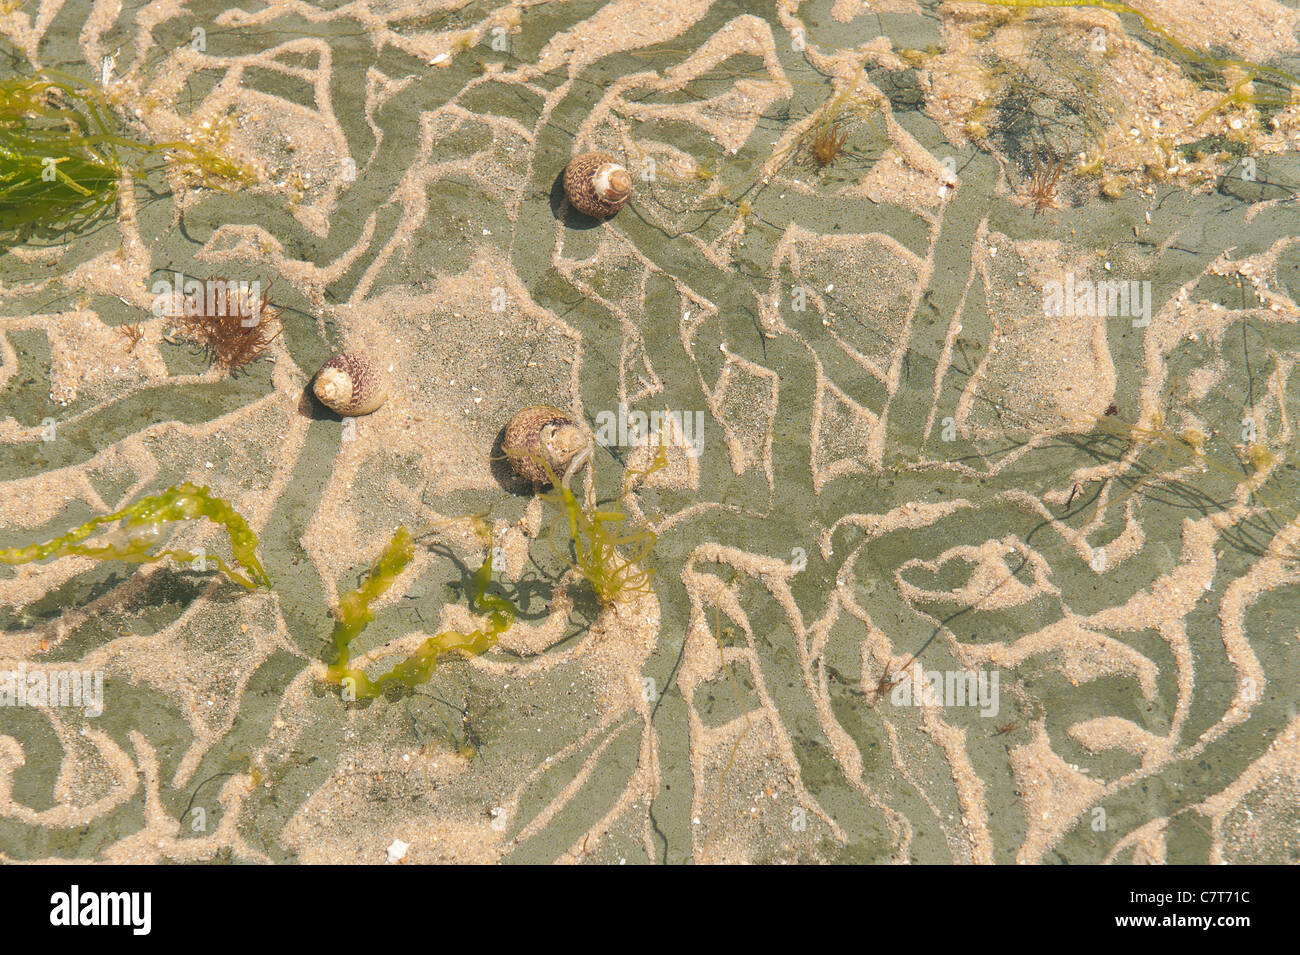 Trails left by winkles in clear rock pools Stock Photo